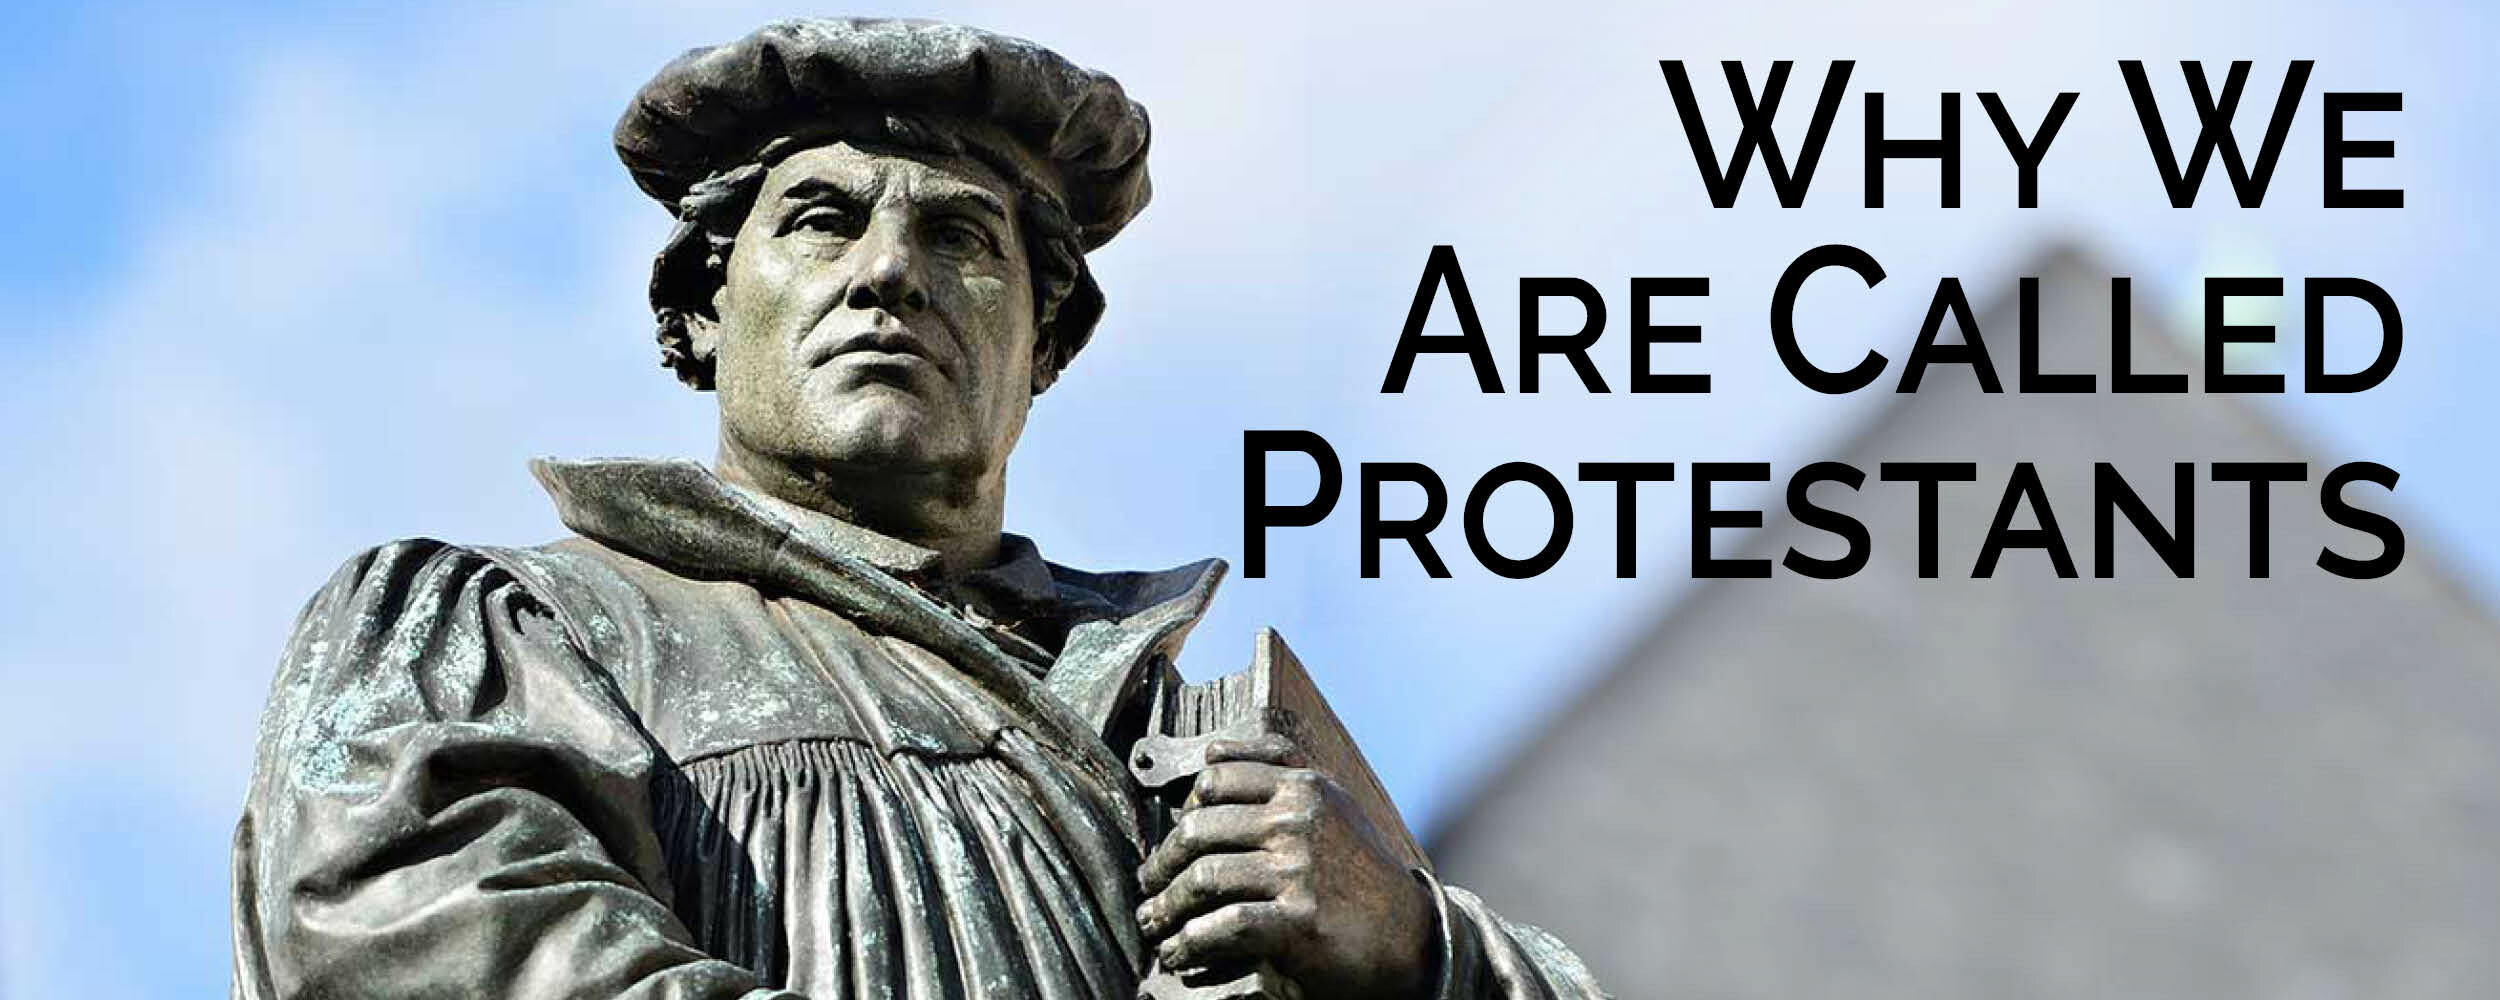 Why we are called Protestants